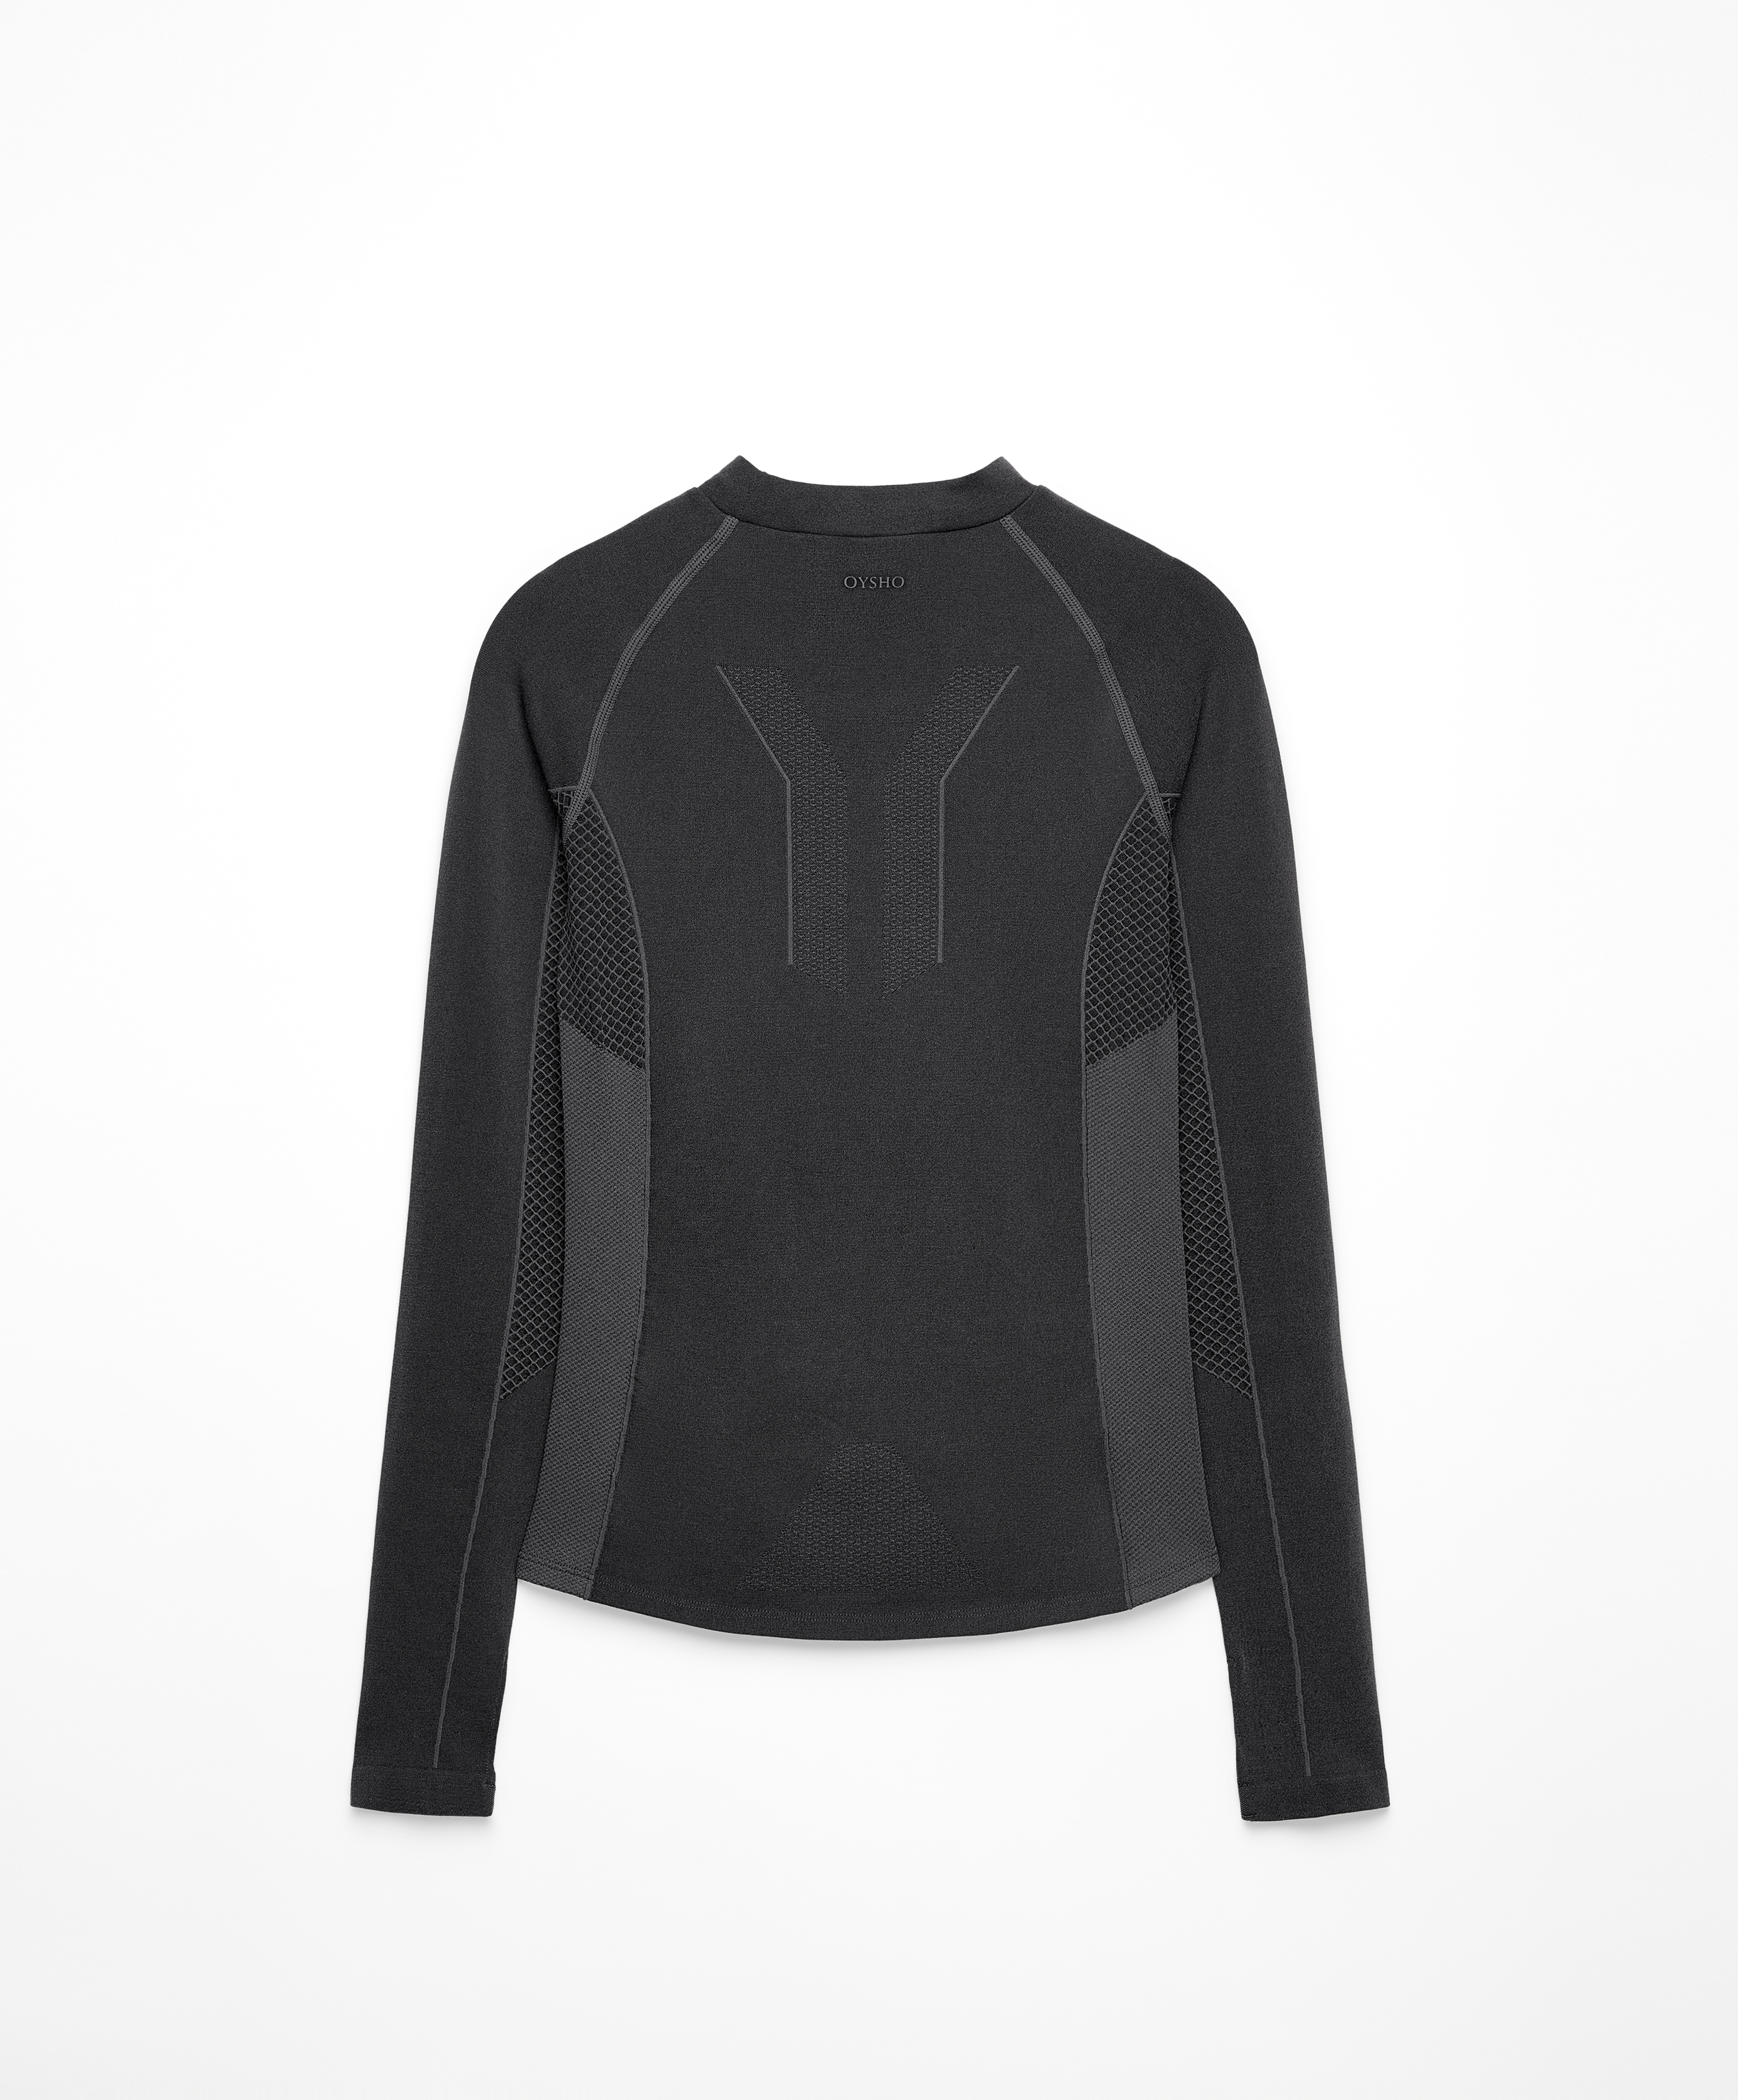 Light warmth seamless long-sleeved technical top